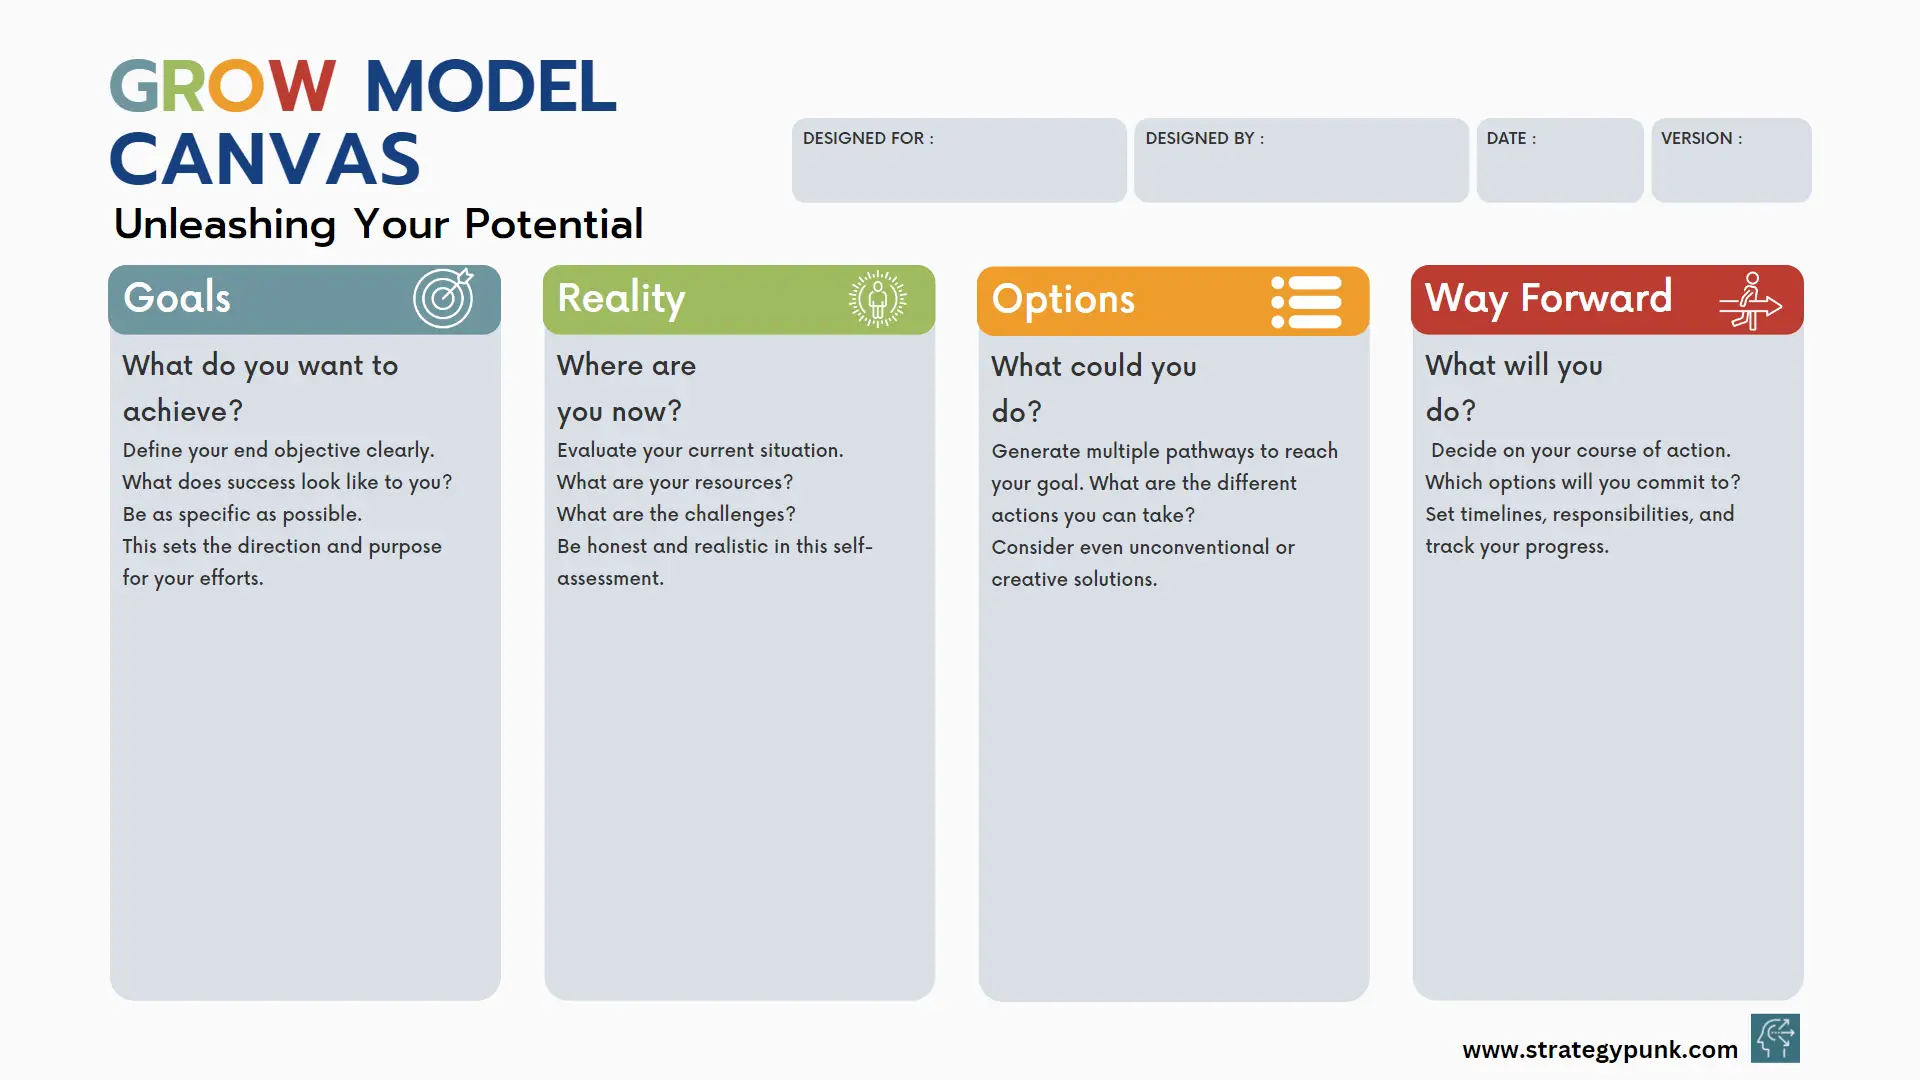 Ignite Your Potential with the GROW Model Canvas (FREE Template)